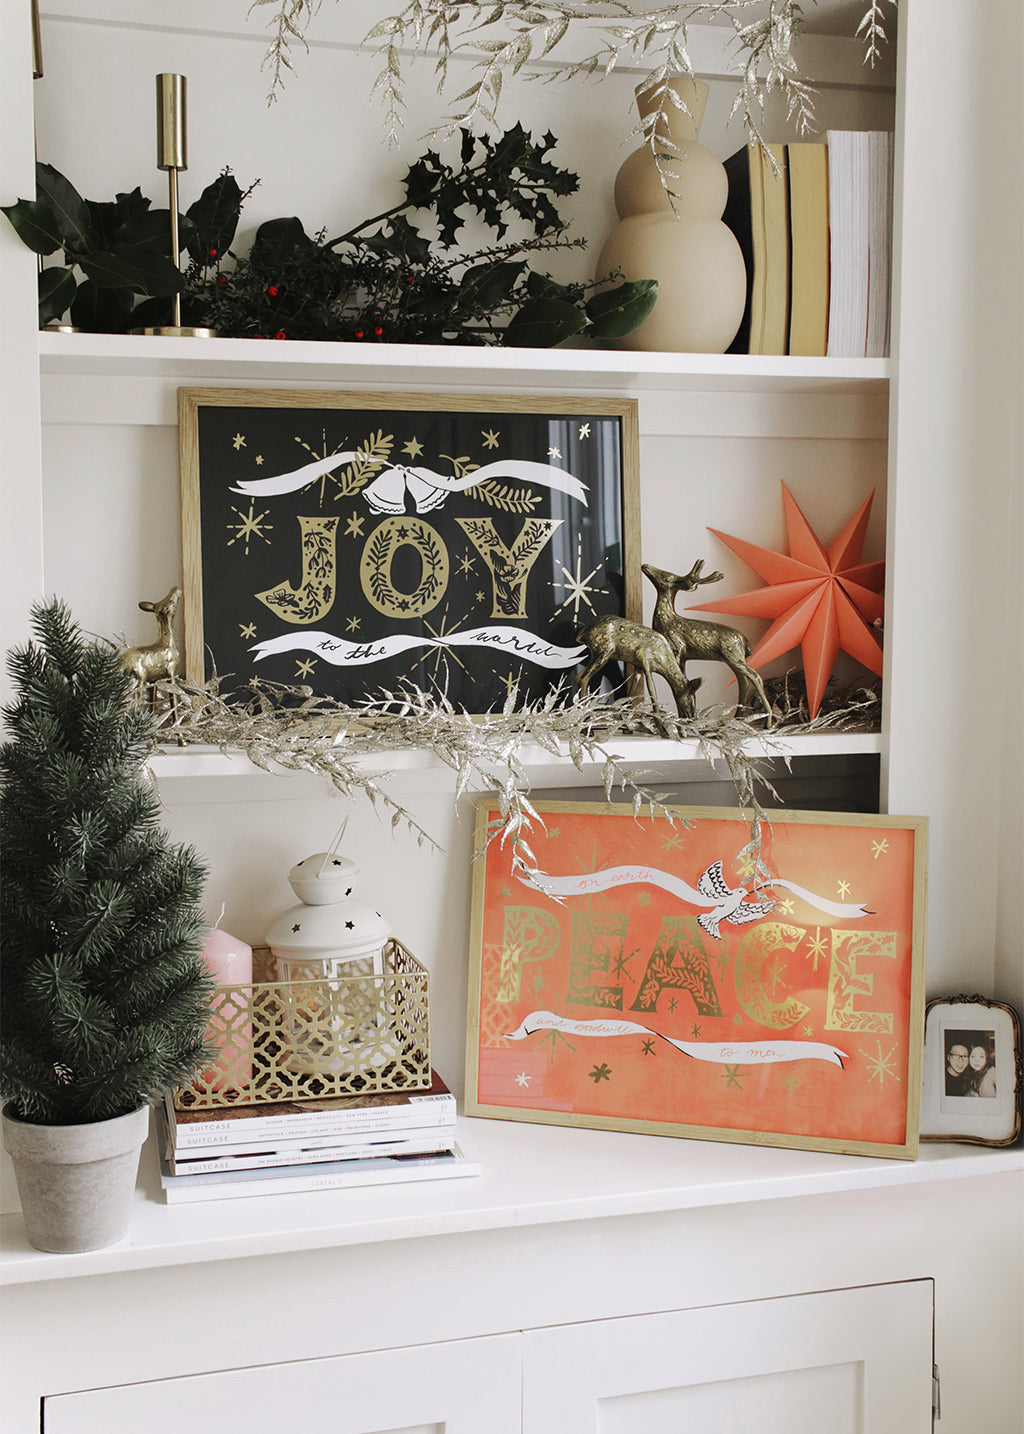 Navy Christmas Print With Gold Joy Lettering And Stars In An Oak Frame On A Book Shelf - Annie Dornan Smith